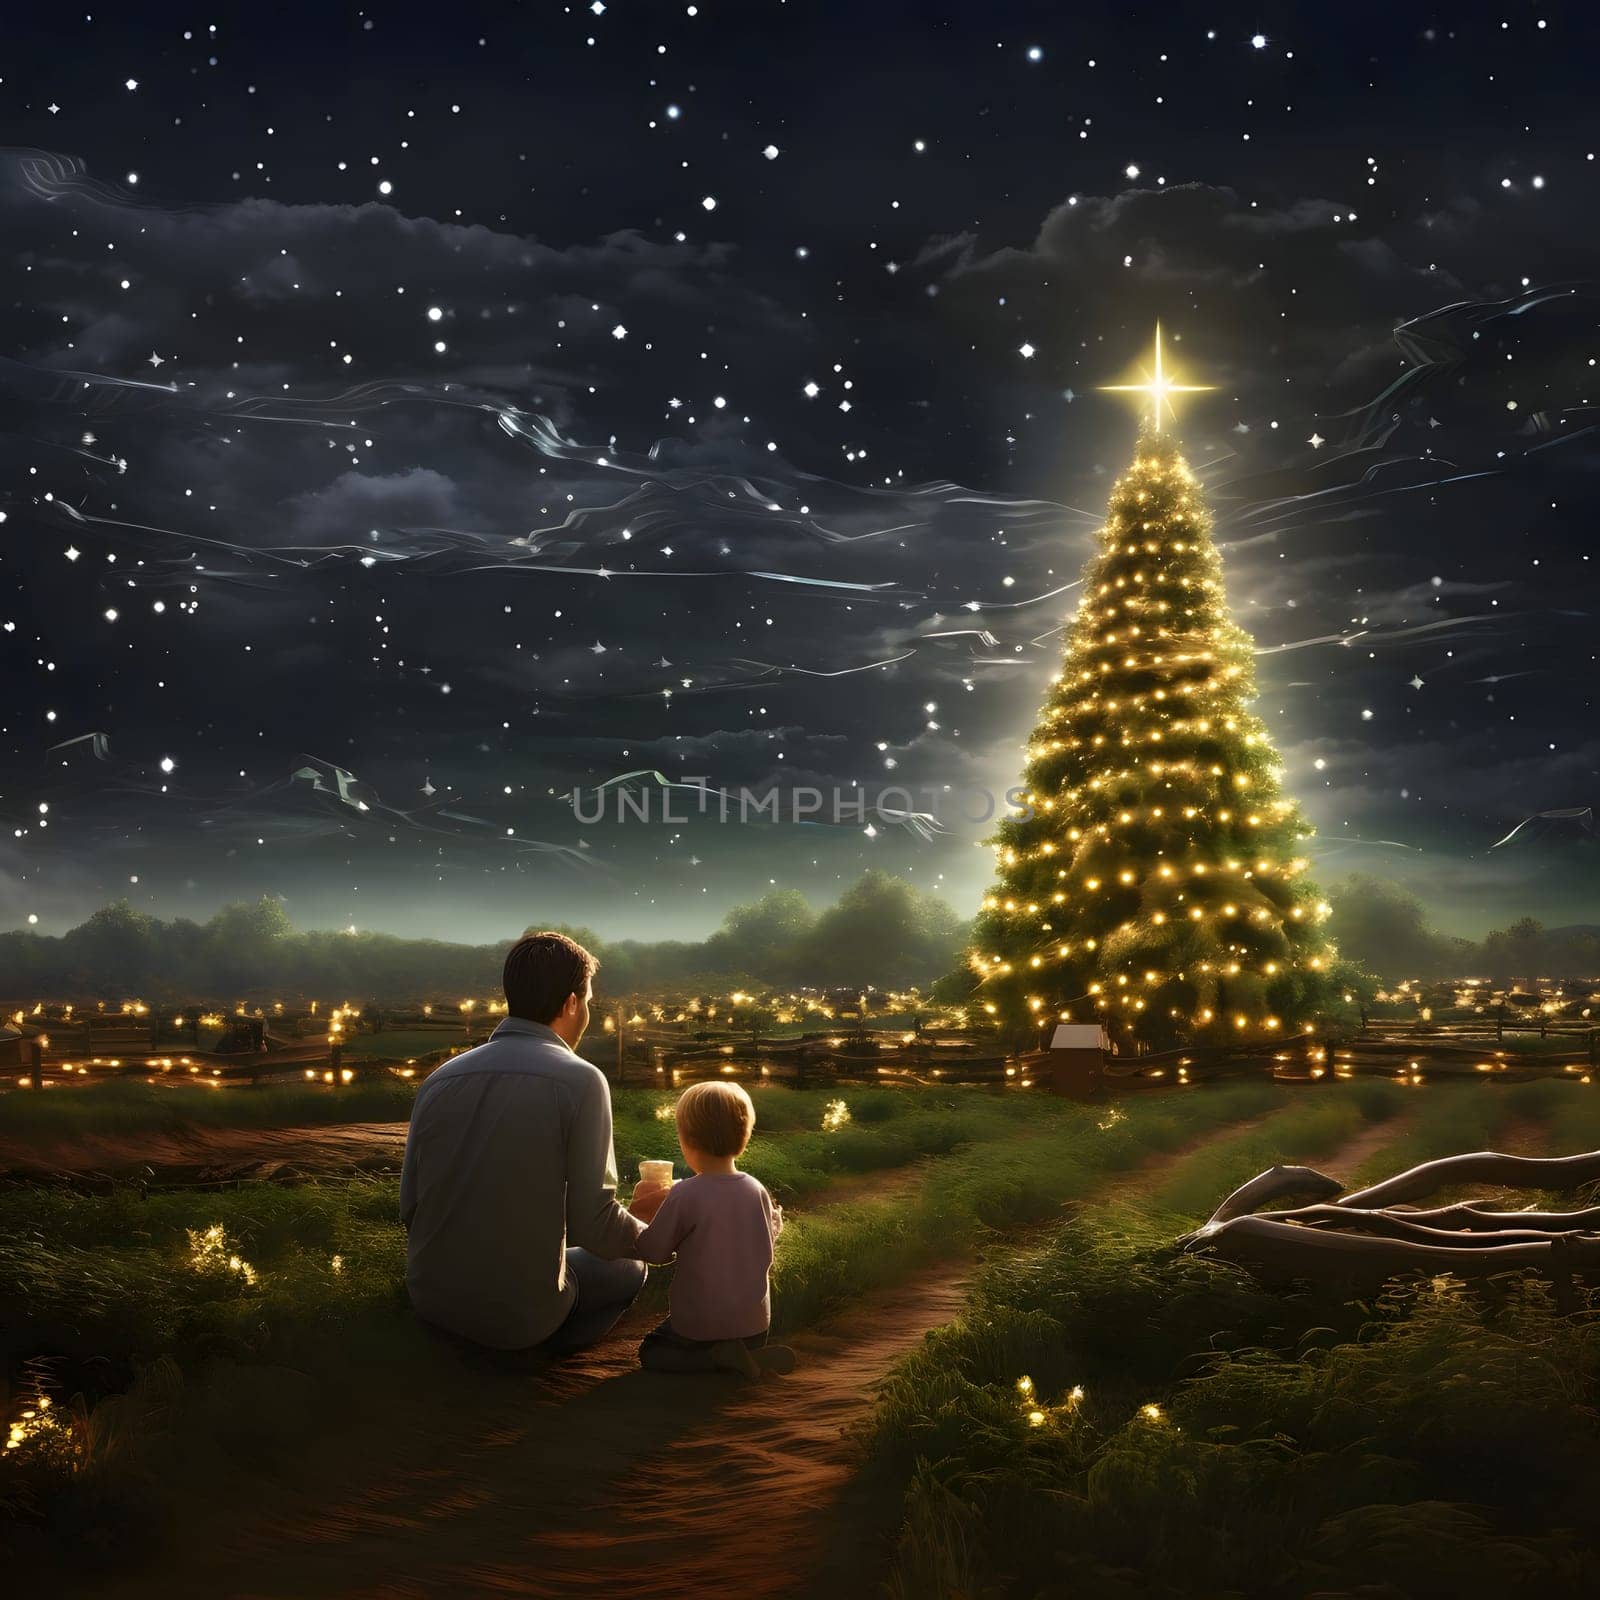 A father and his son in a clearing, observing a large Christmas tree with illuminated lights at night. Xmas tree as a symbol of Christmas of the birth of the Savior. by ThemesS